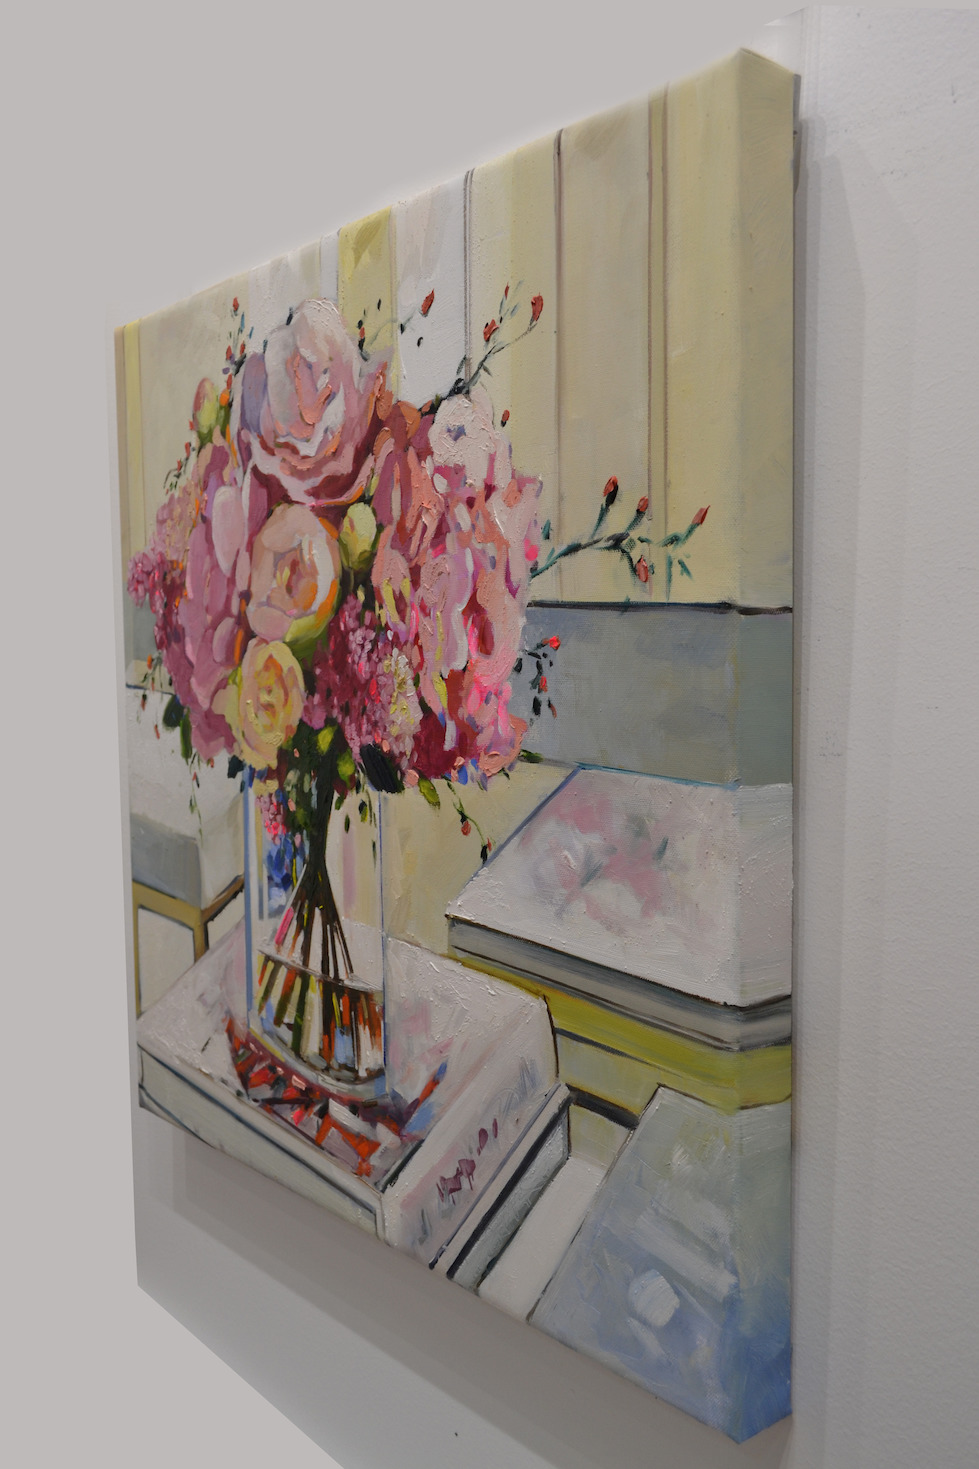 Side View Of Still Life Painting "Boho Bouquet" By Judith Dalozzo